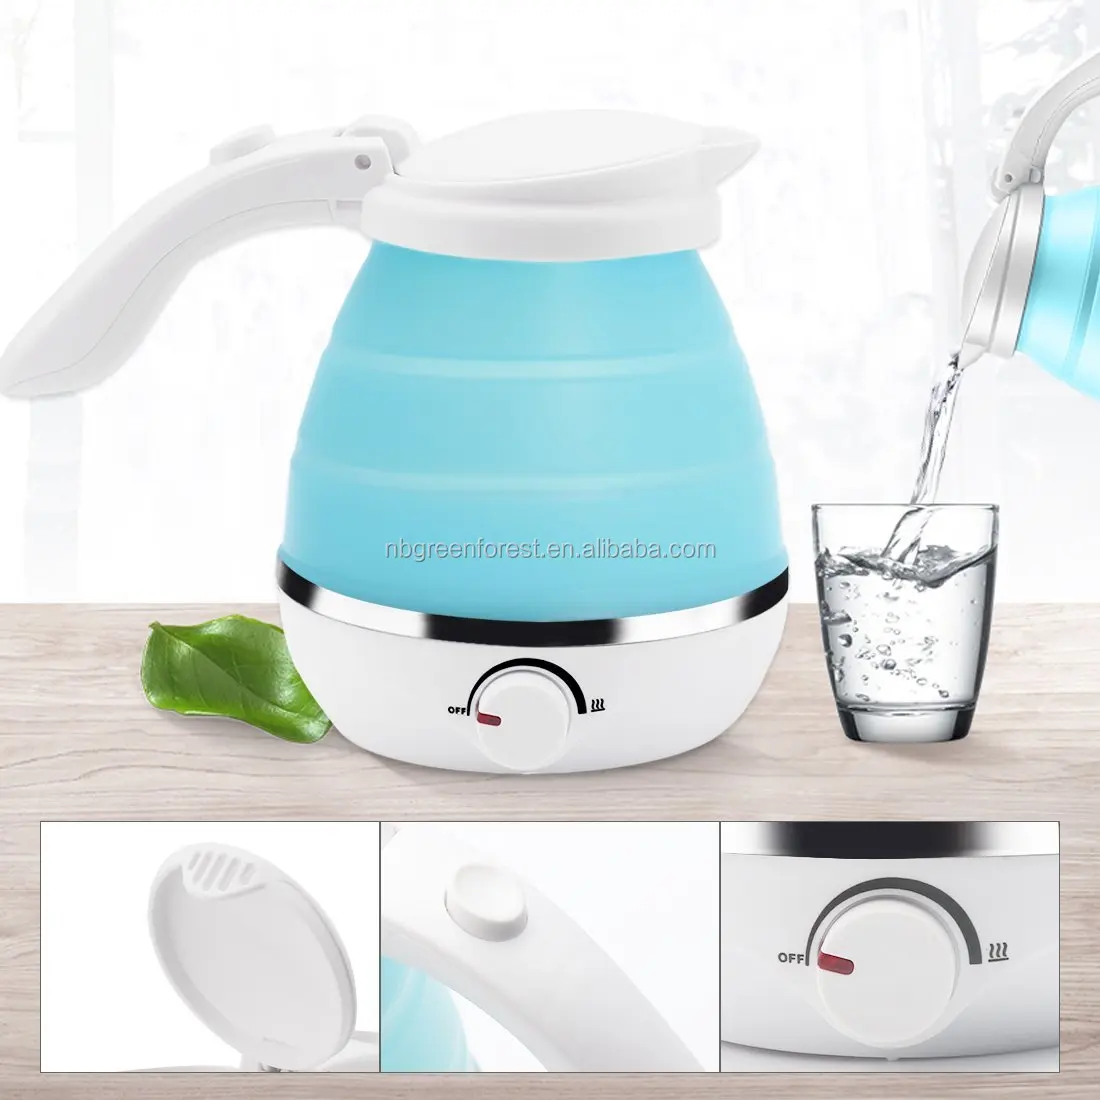 Portable Electric Kettle Silicone Foldable Travel Camping Water Boiler Adjusting 